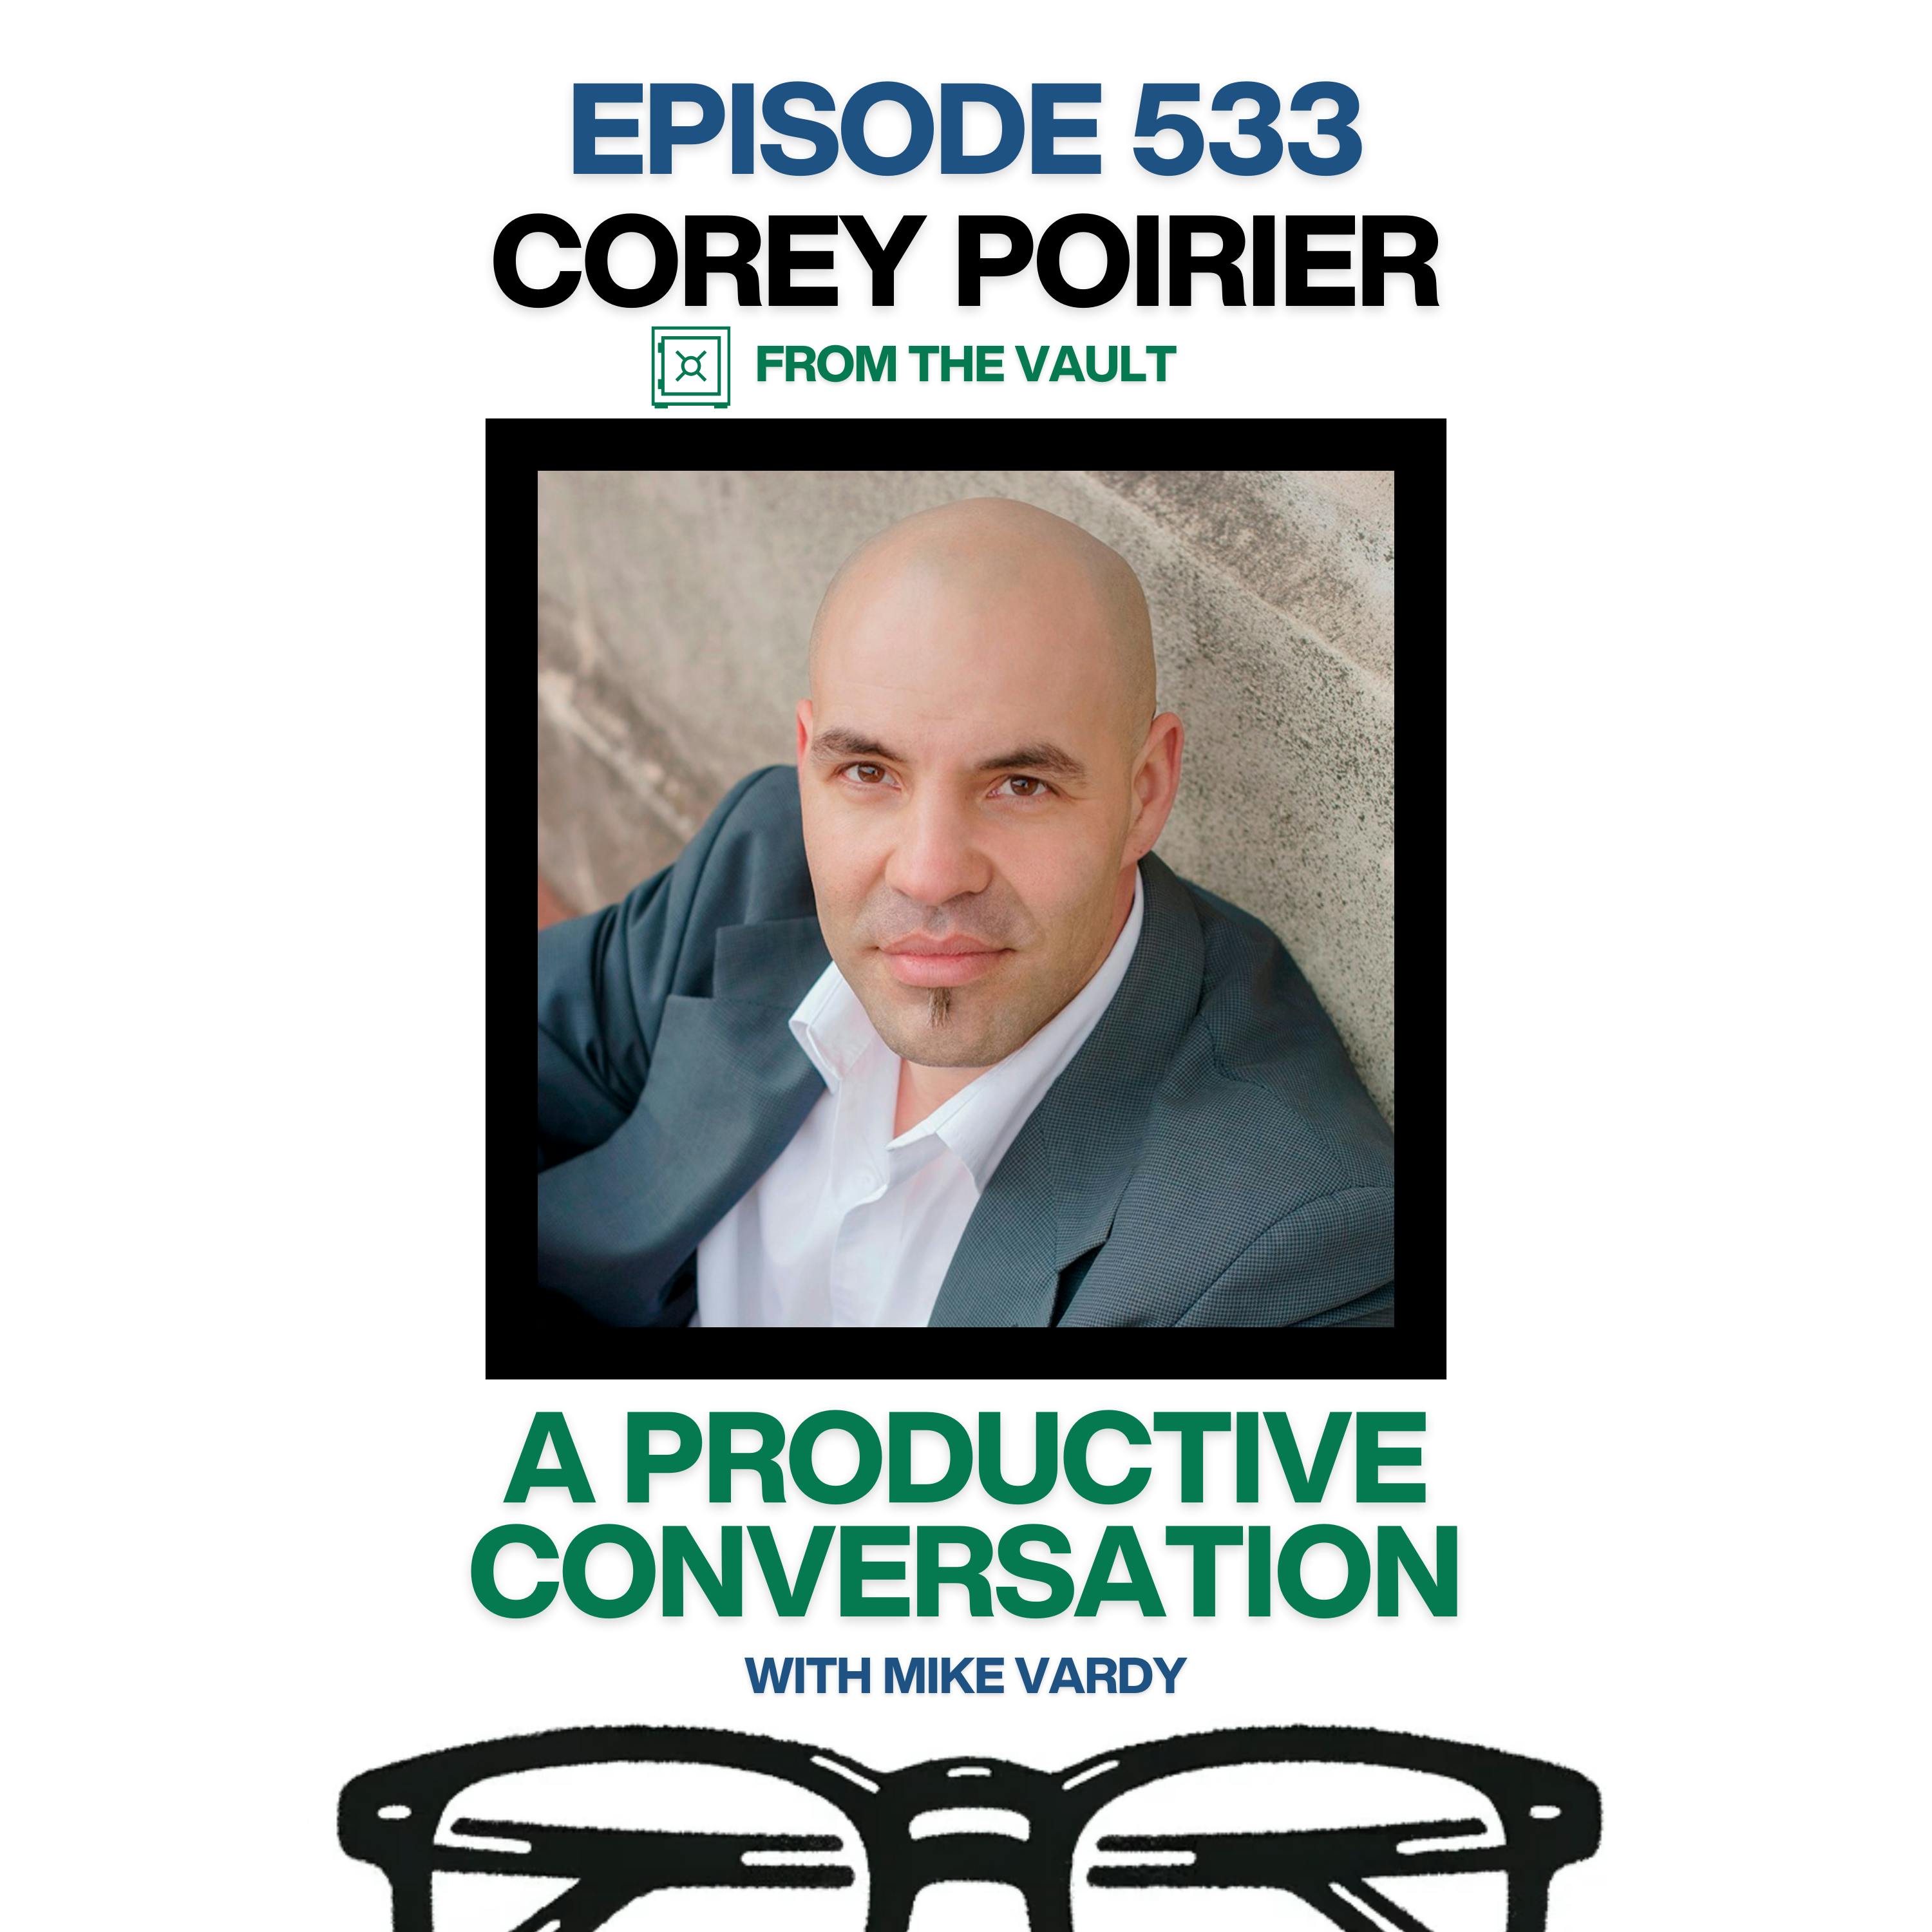 FROM THE VAULT: Corey Poirier Talks About Finding Your Passion and Overcoming Public Speaking Fears